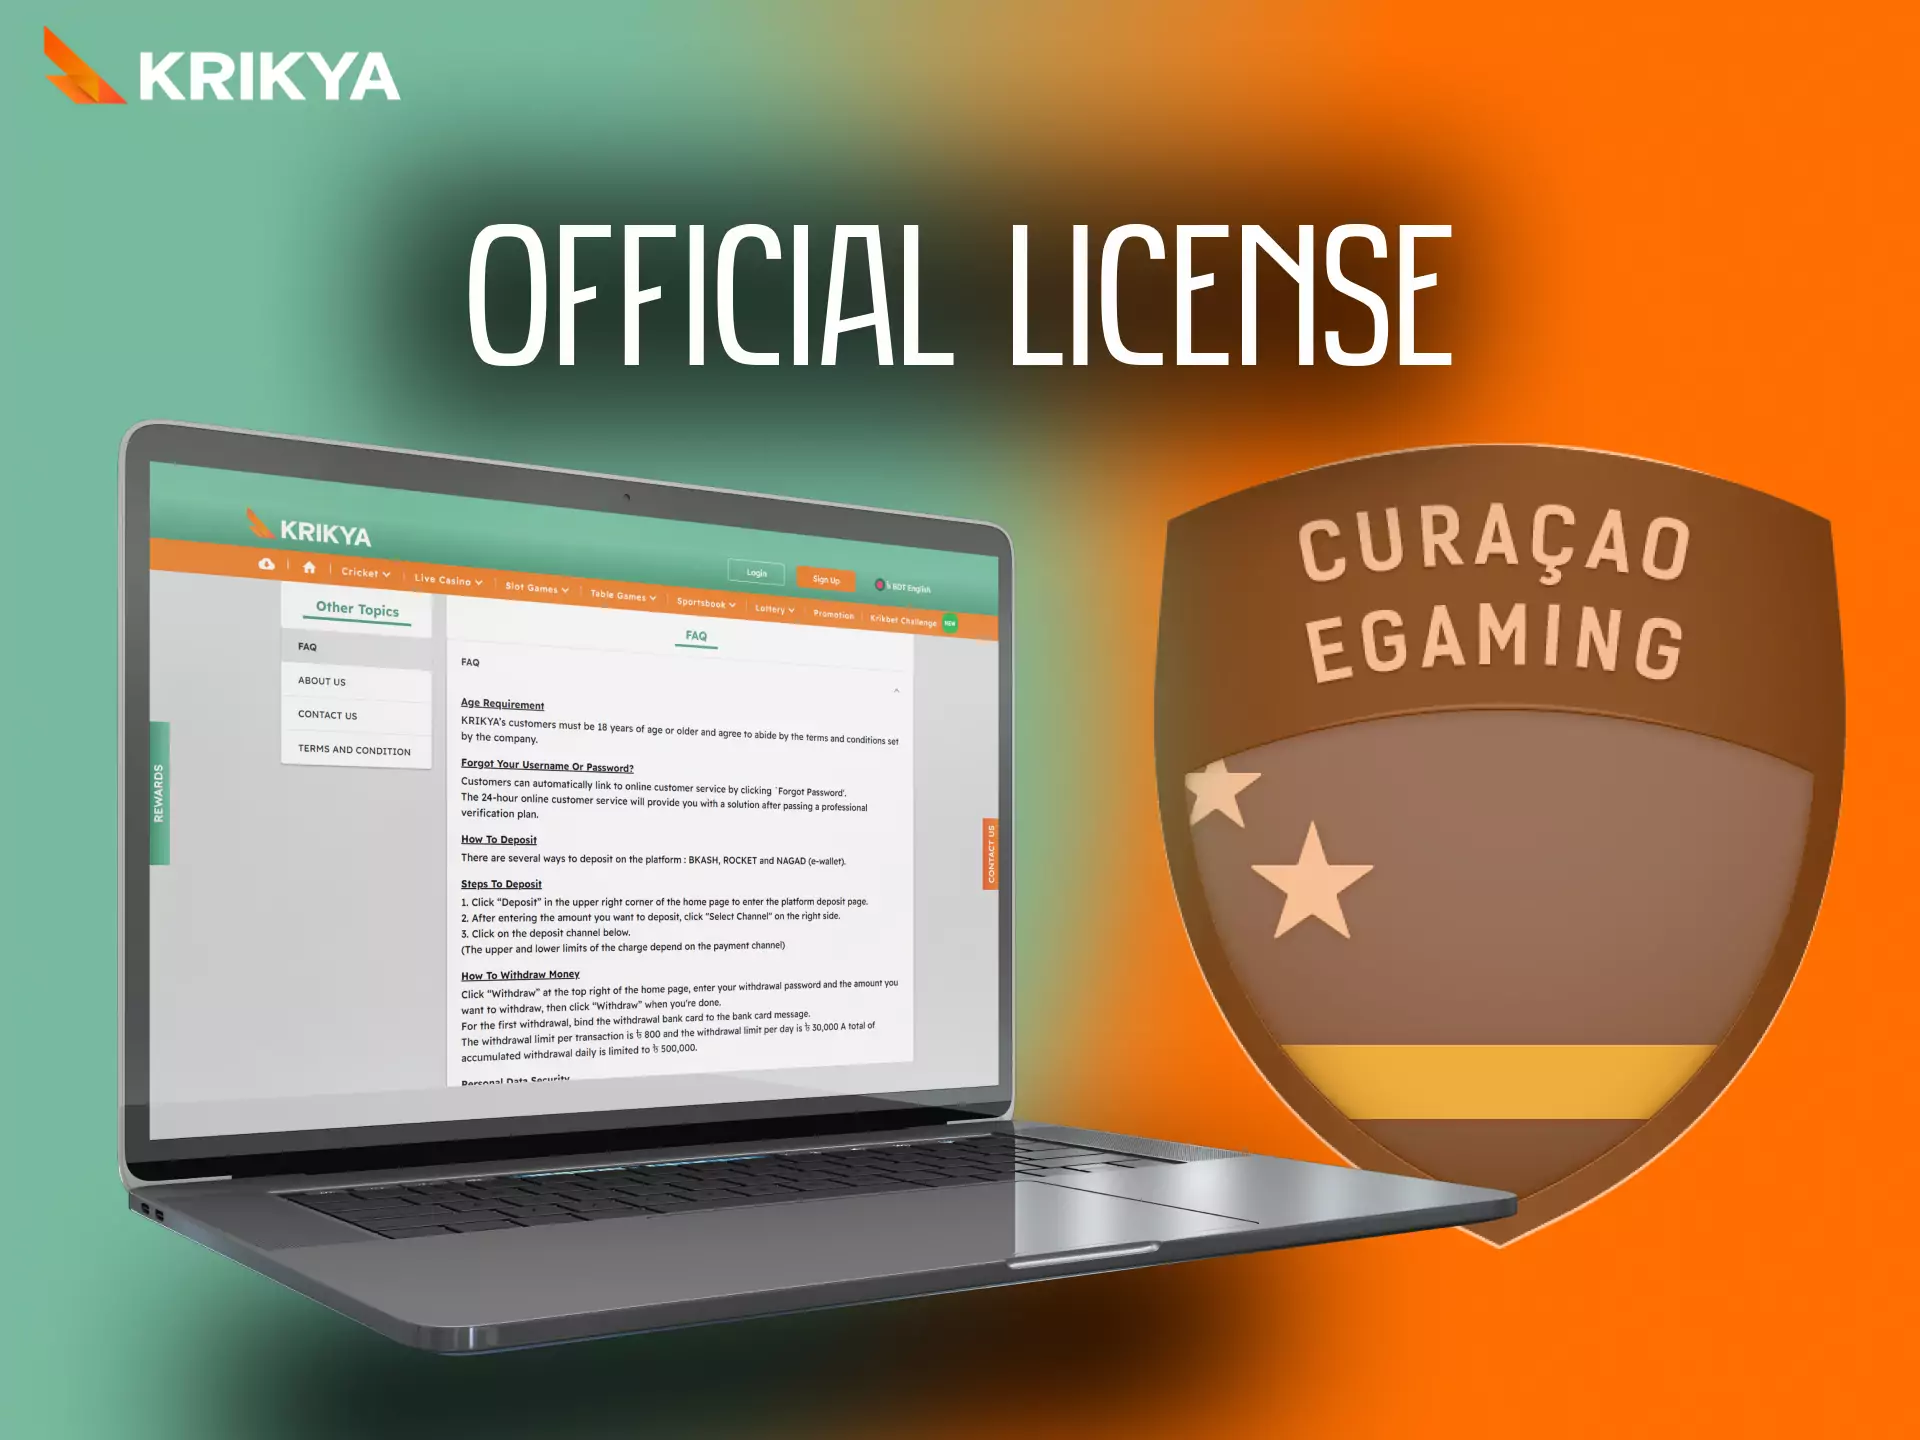 Krikya has an official license and is completely safe for players.